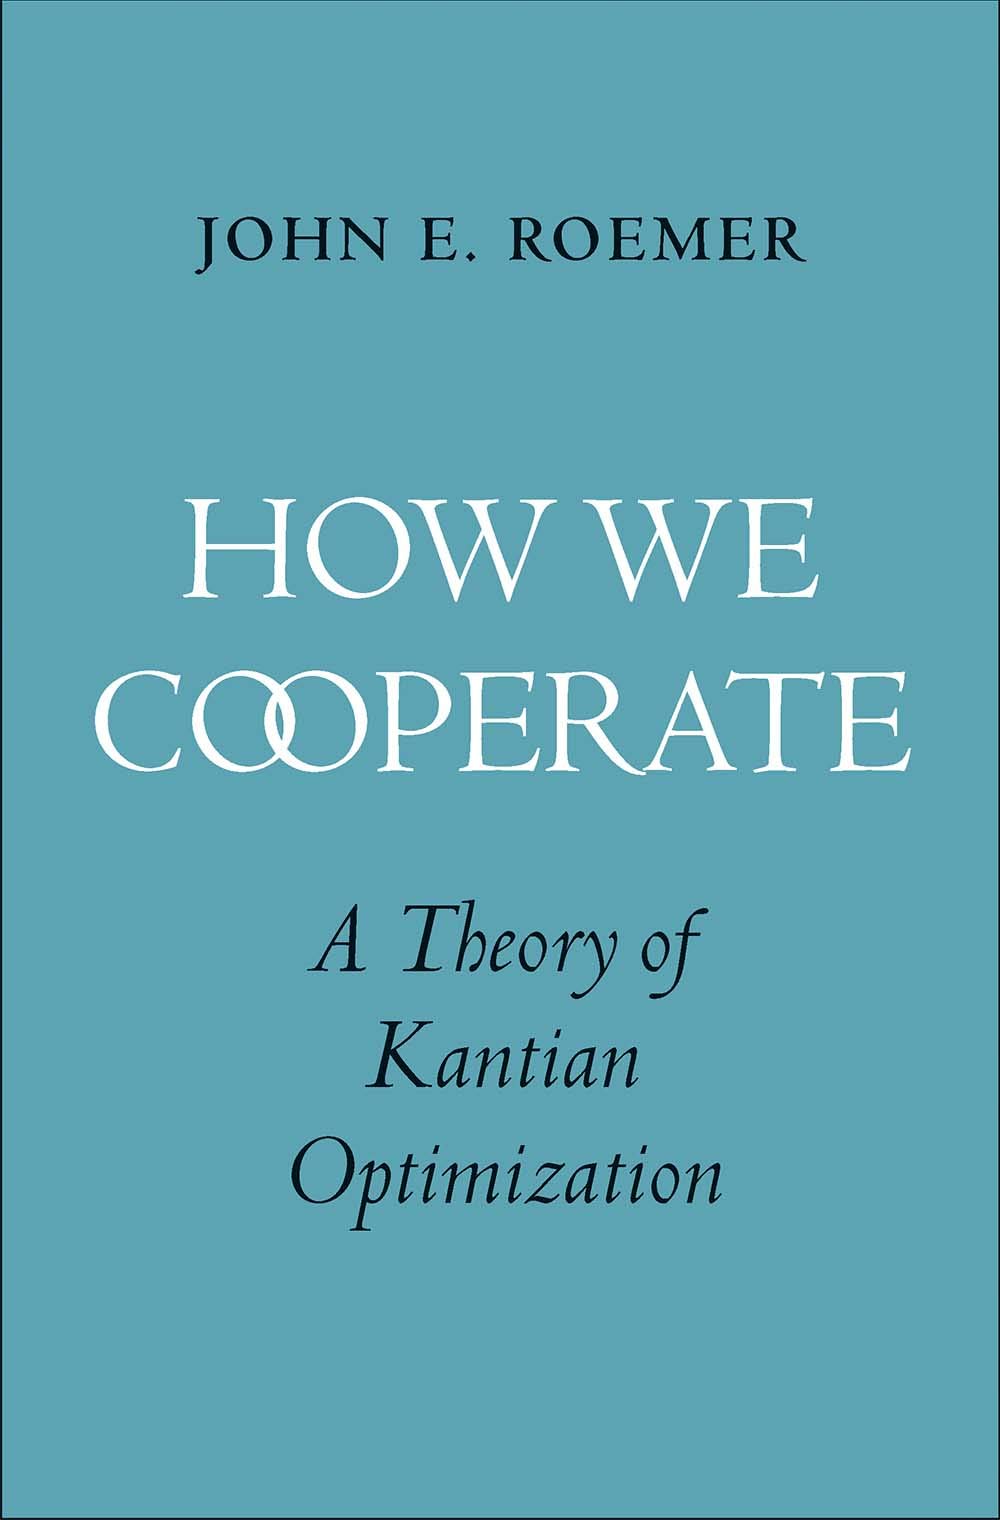 HOW WE COOPERATE A THEORY OF KANTIAN OPTIMIZATION-9780300233339